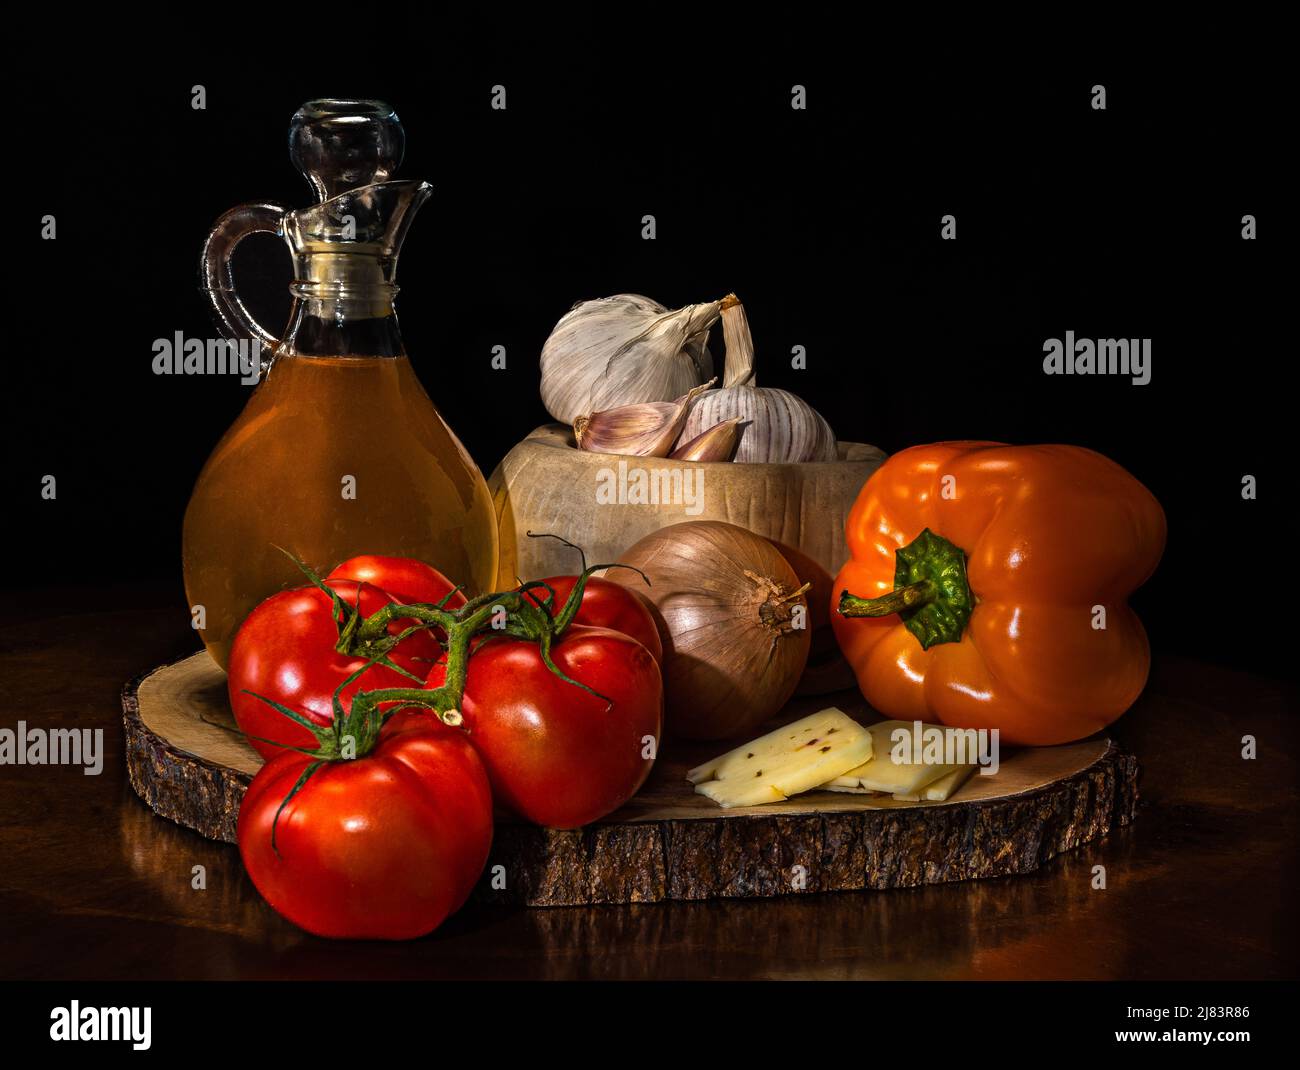 Olive oil, vegetables on a wooden pallet. Tomatoes, red and yellow peppers, cheese, onion and garlic composition for canvas print. Stock Photo